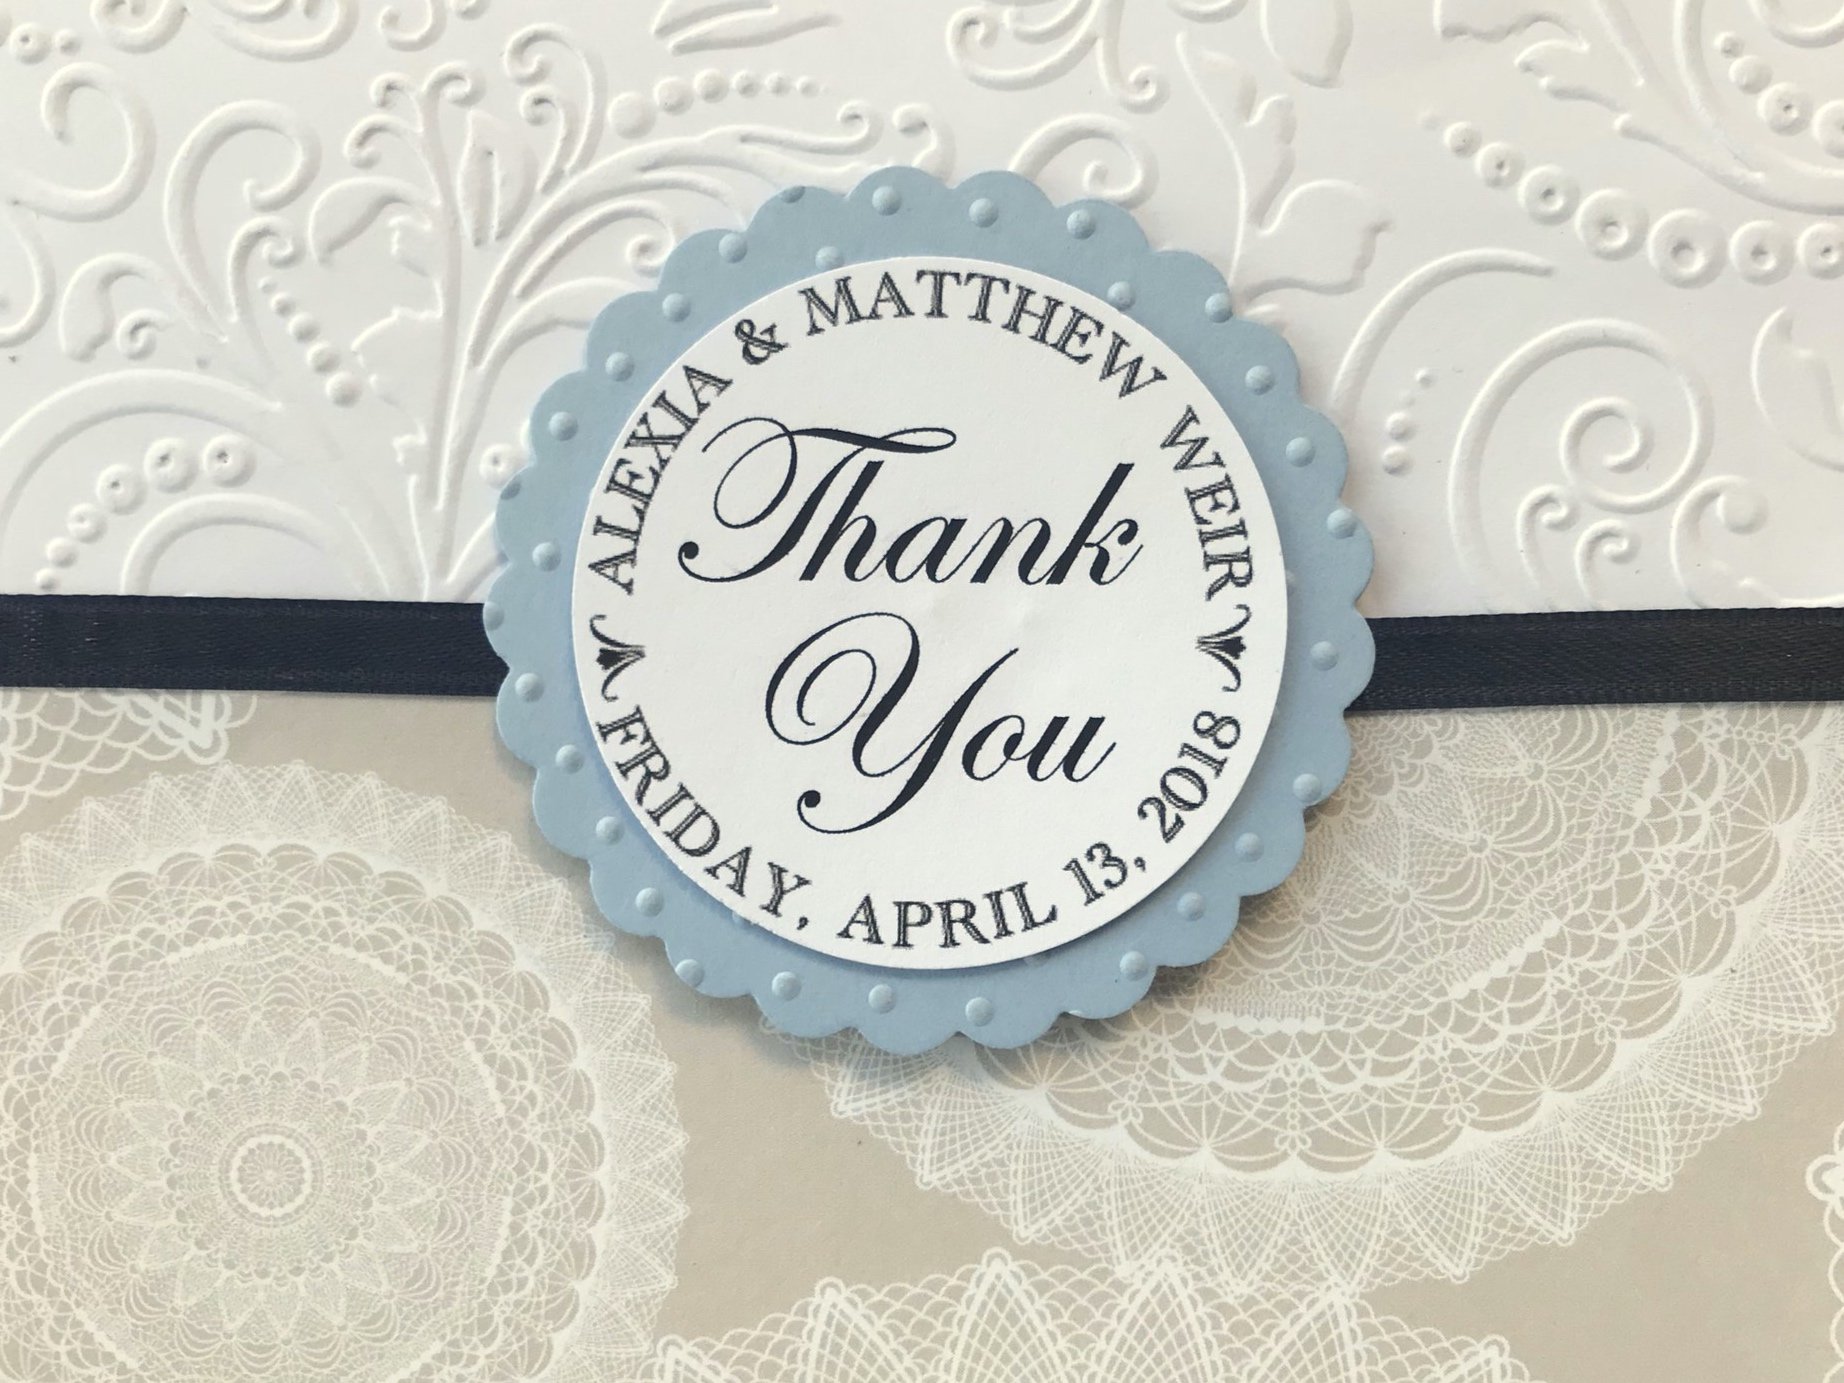 Wedding Thank You - What Are Your Wedding Colors?